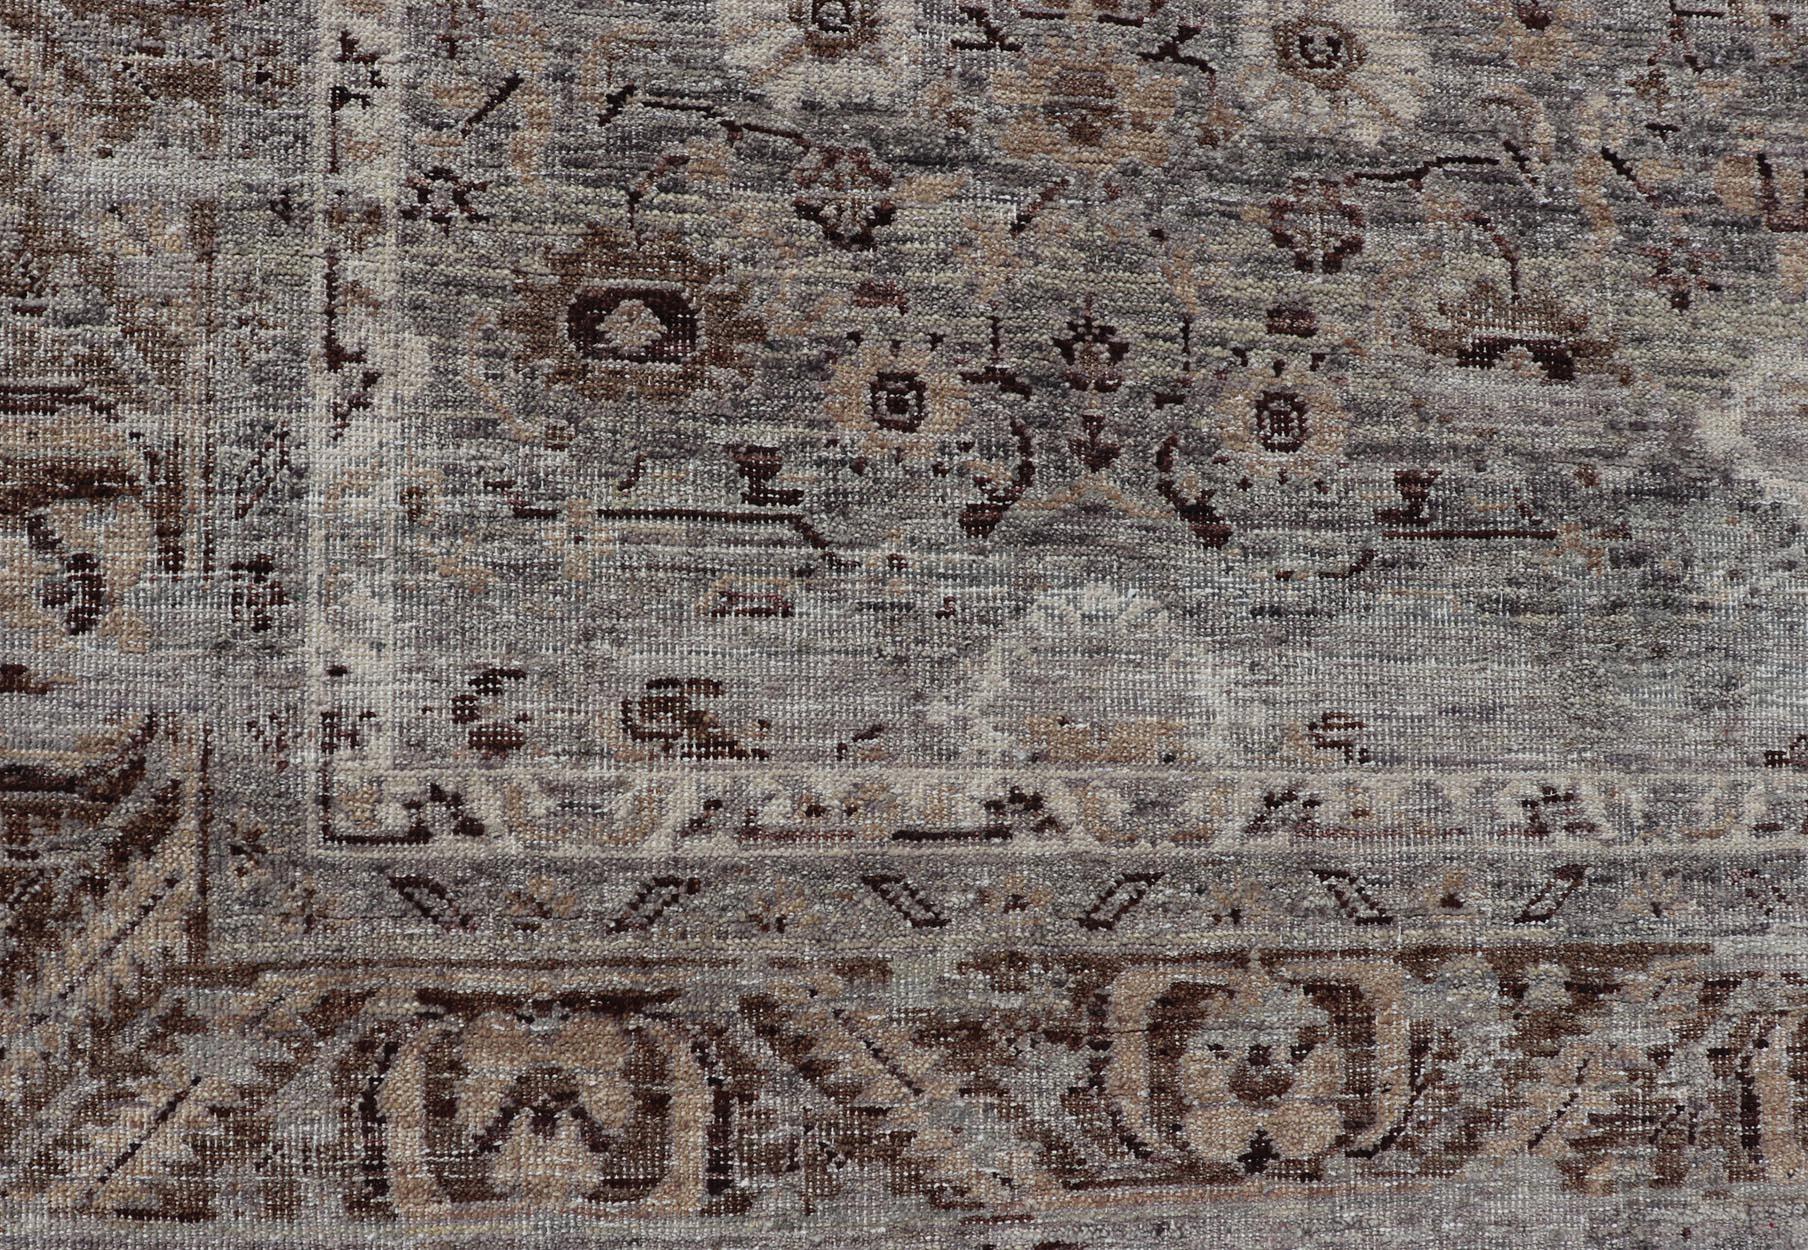 Indian Modern Oushak Rug with Floral Pattern in Gray, Brown Tones and Neutral Colors For Sale